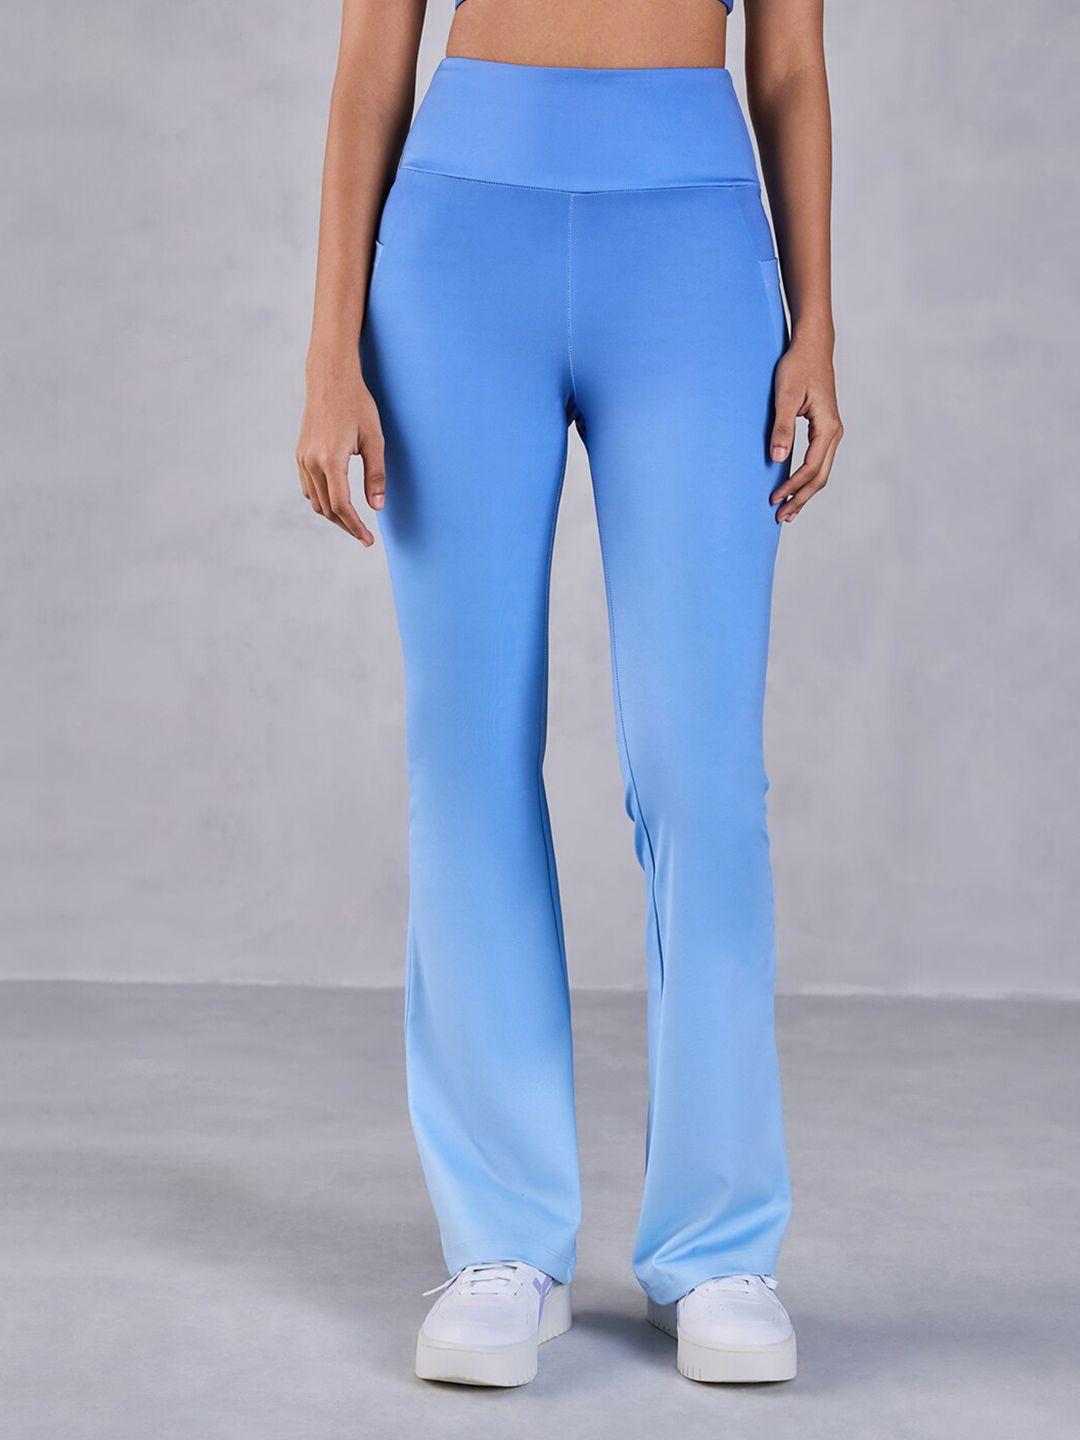 kica winter collection women high-rise ombre flare track pants